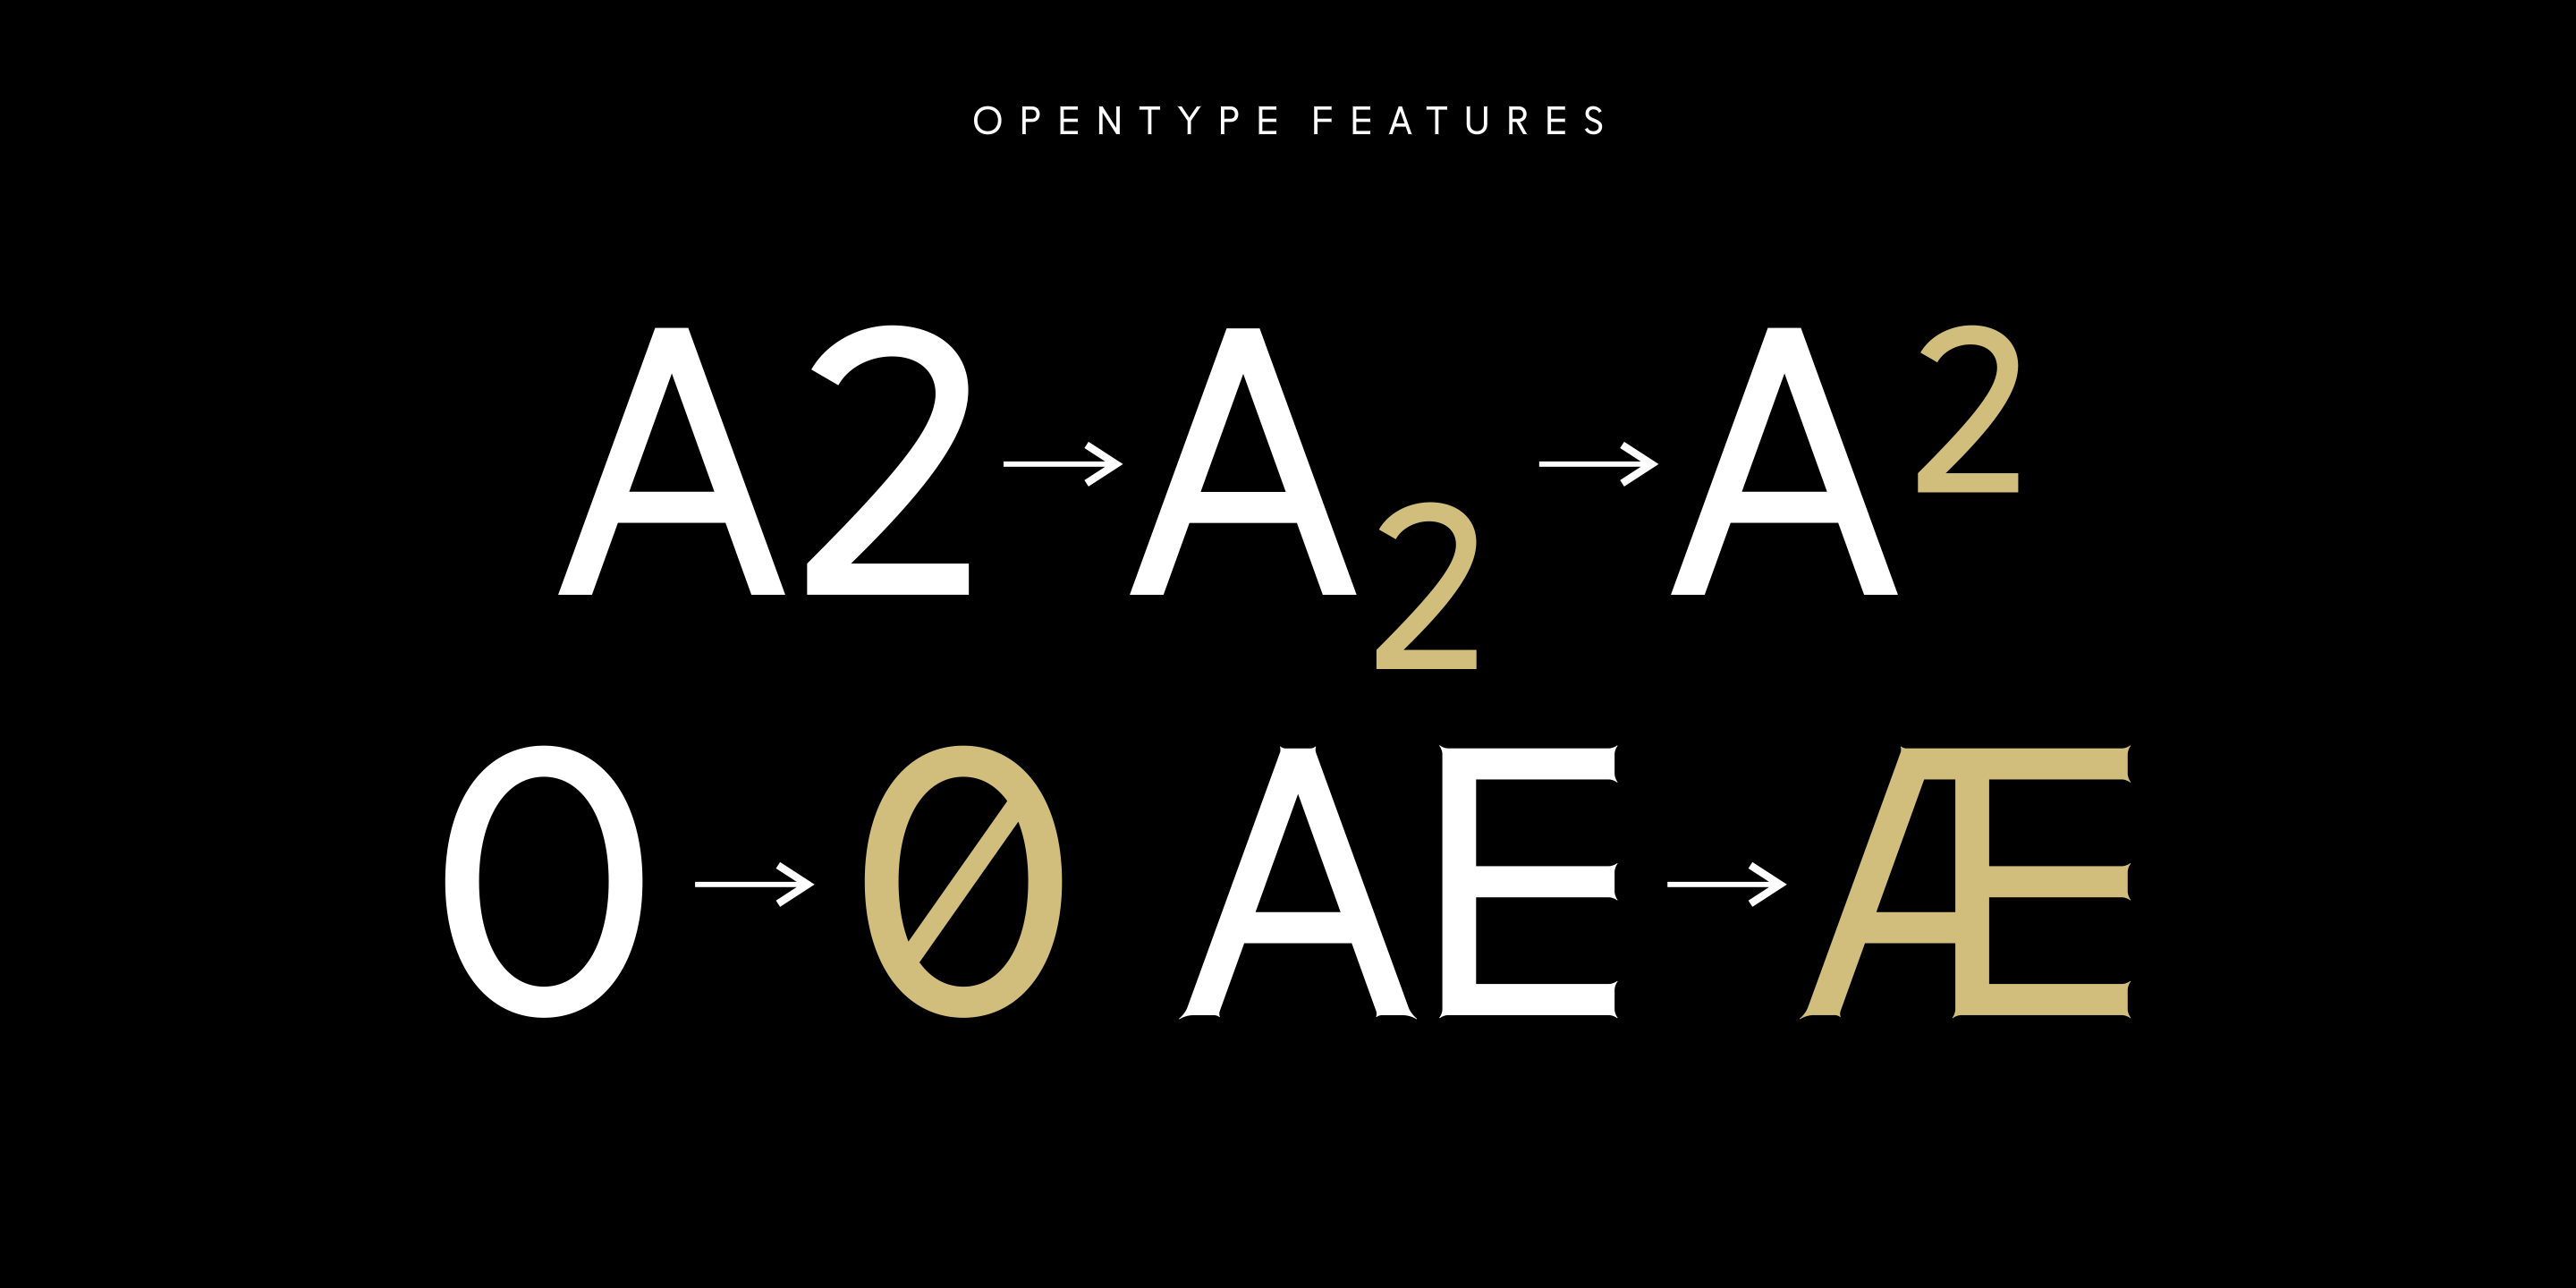 Ostende Gothic Typeface - OpenType features